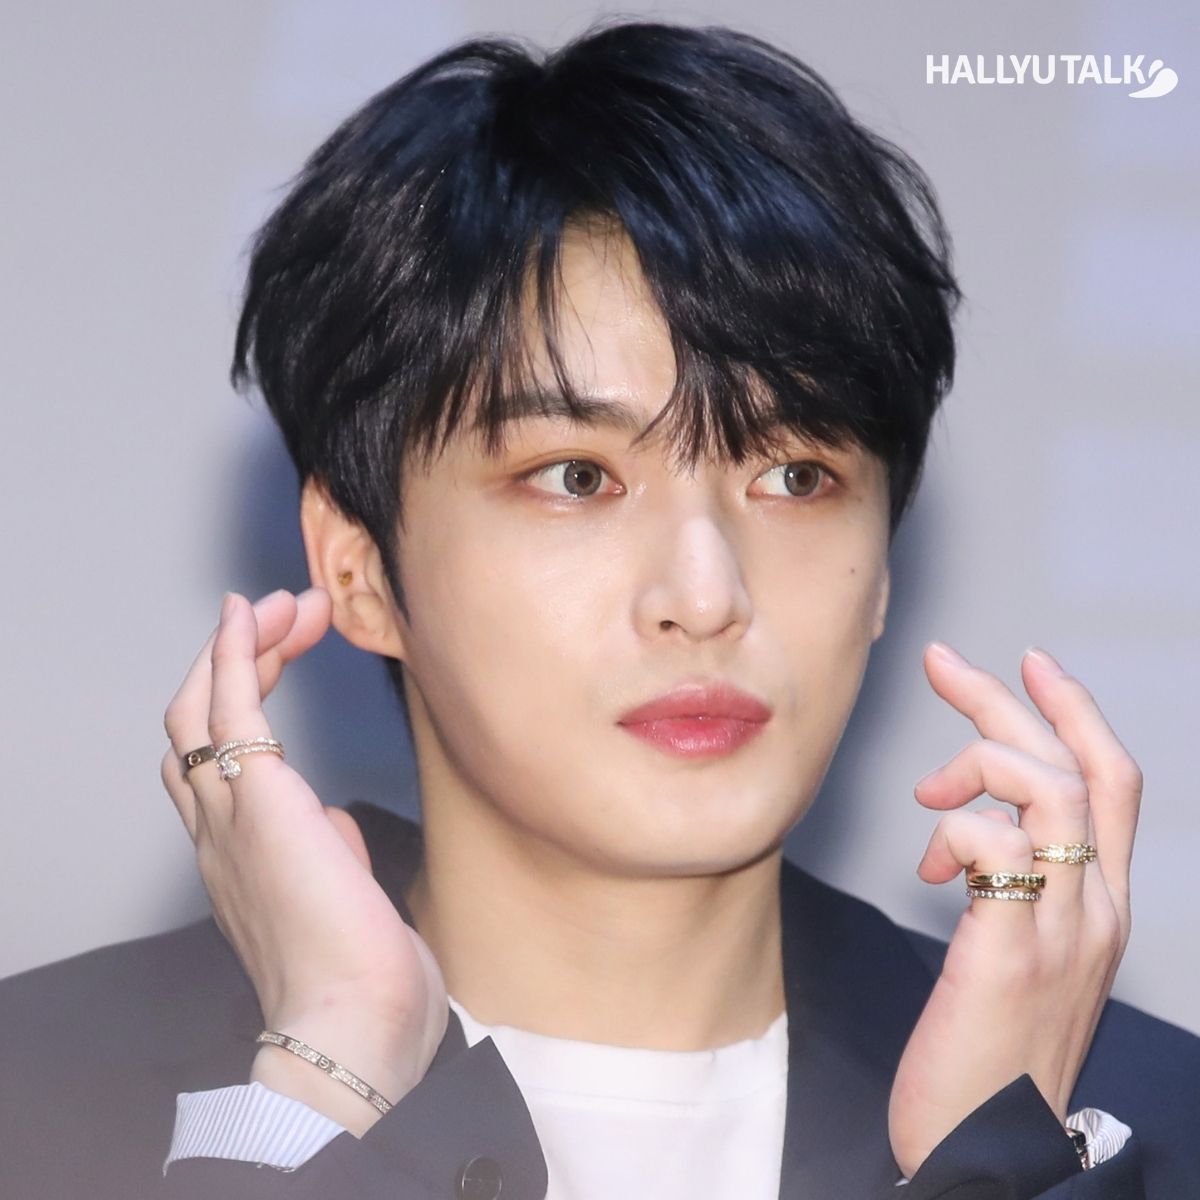 Former TVXQ and current JYJ member Kim Jaejoong at a press conference in 2018